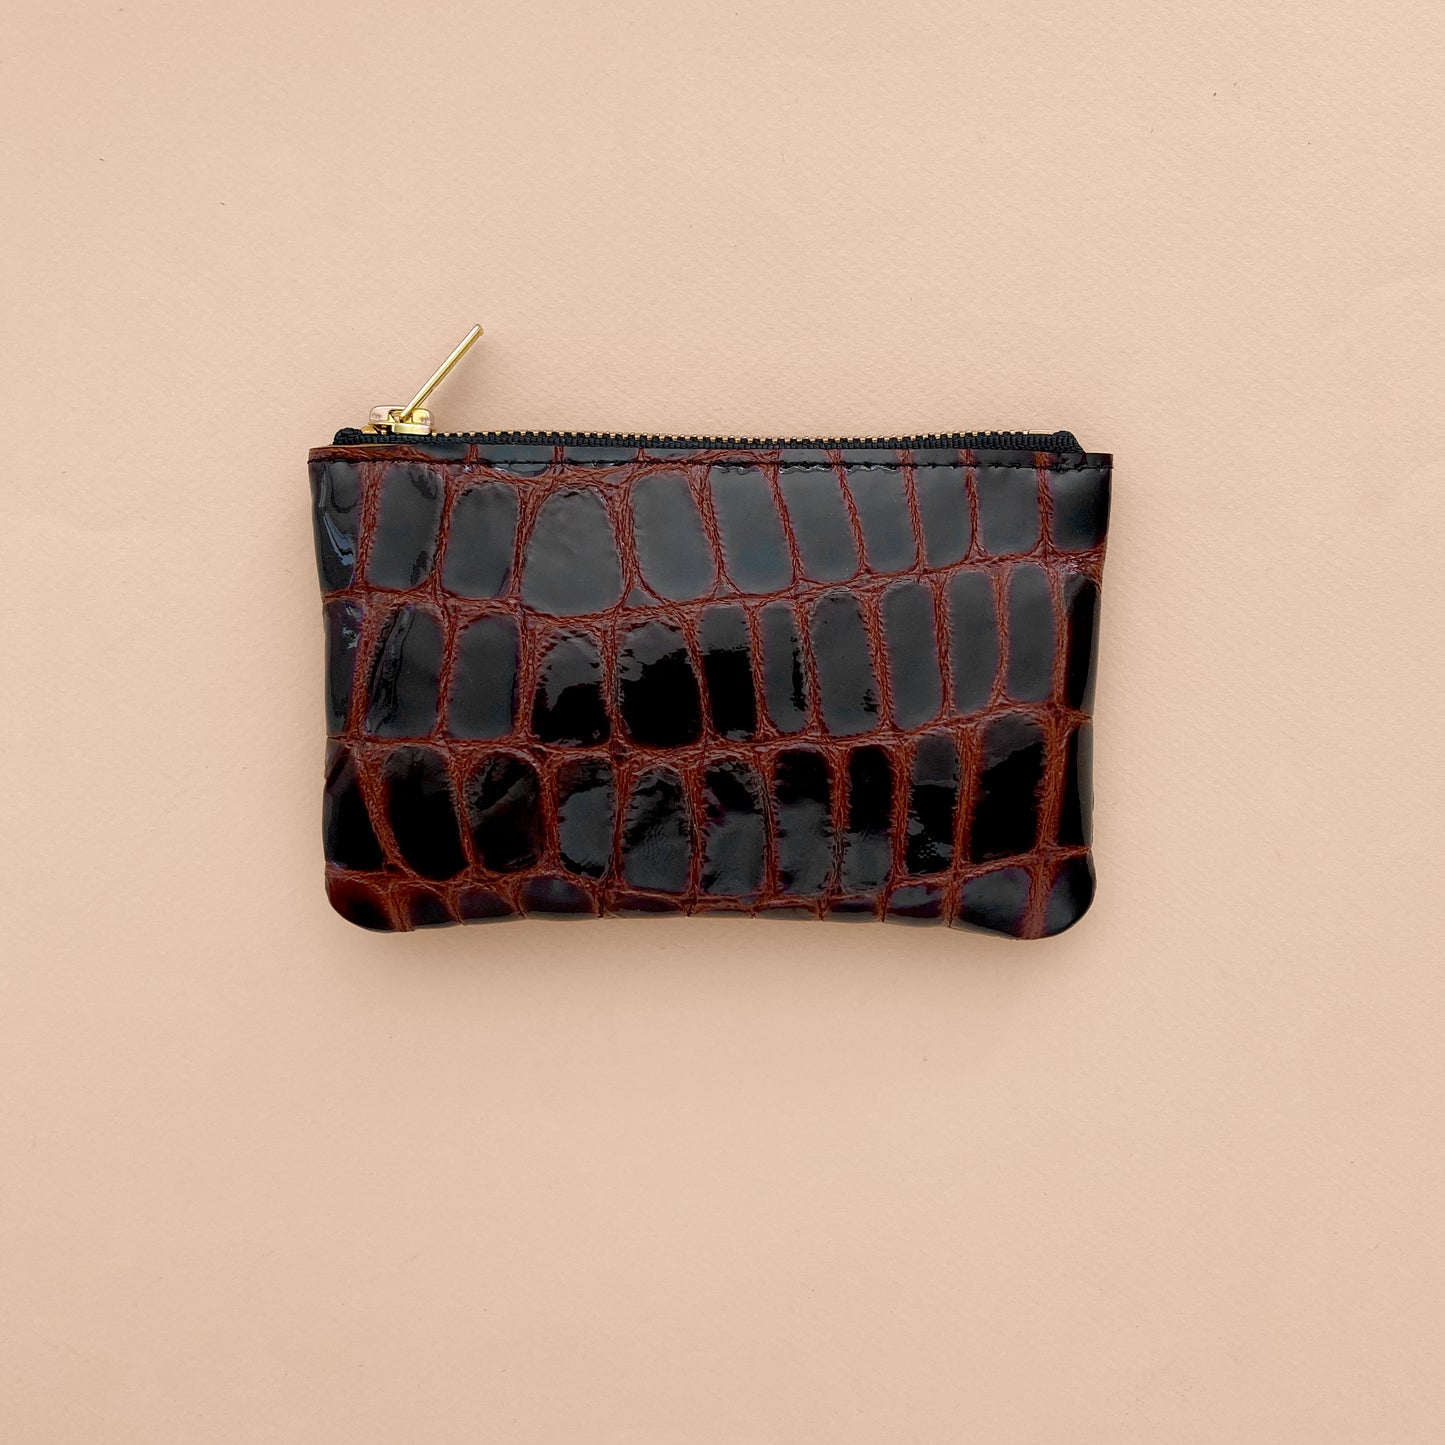 Lucy pouch 5.5"